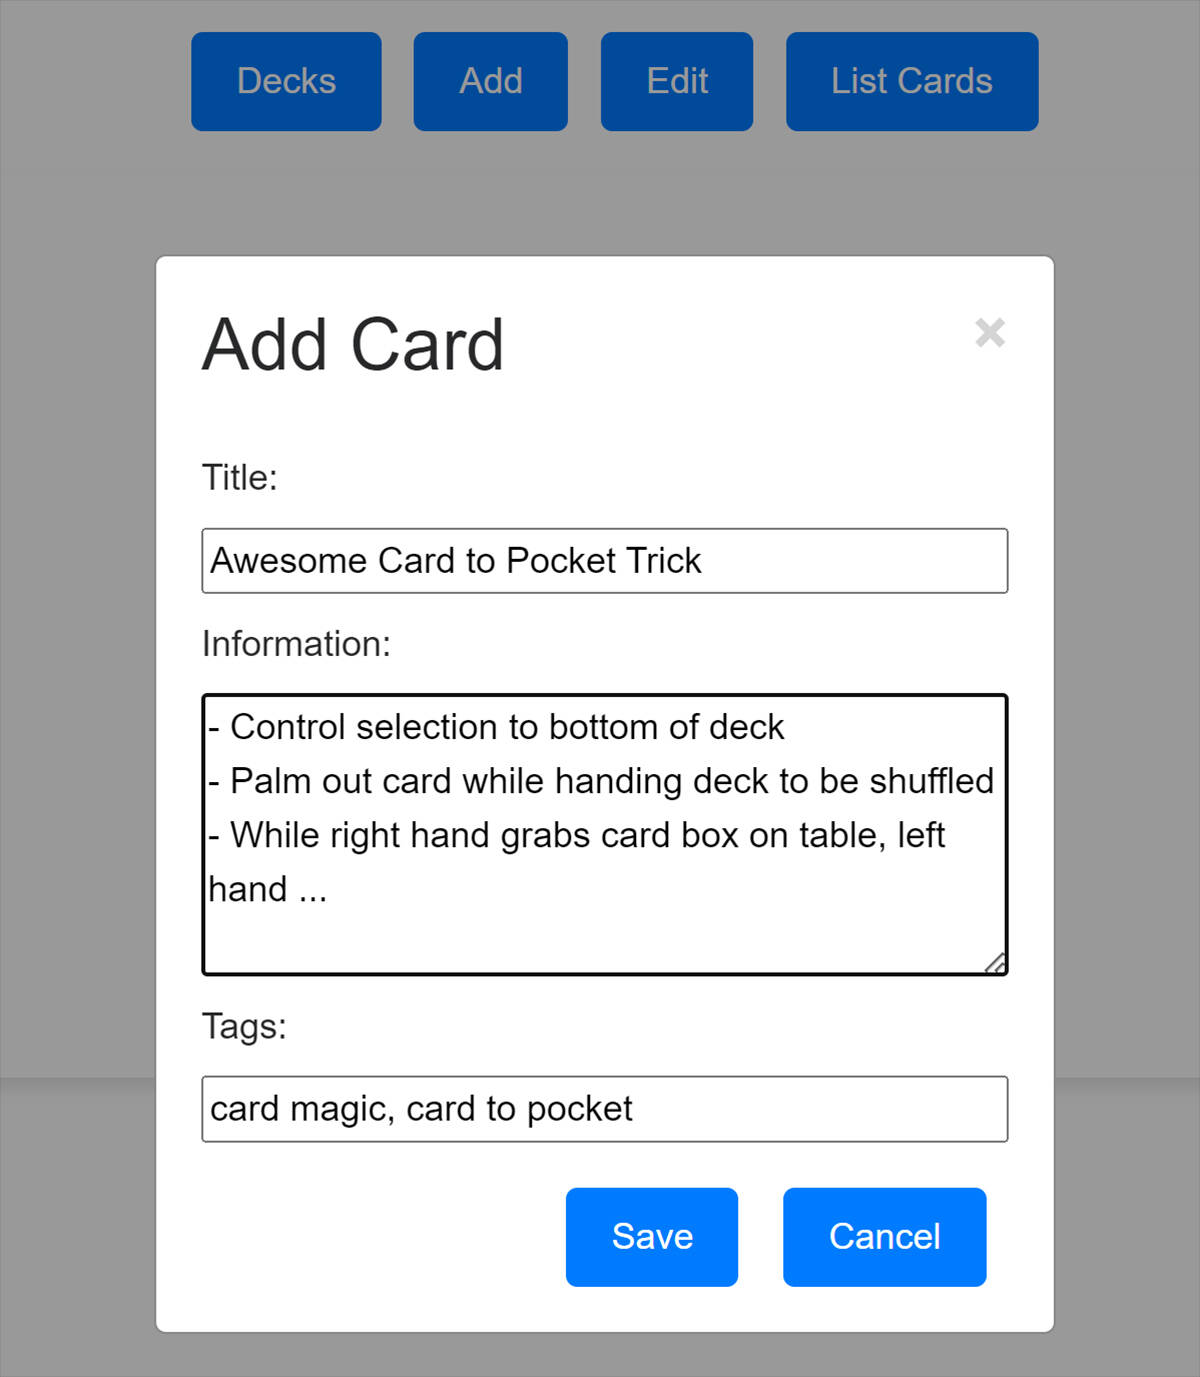 The "Add Card" form in my flash cards app.